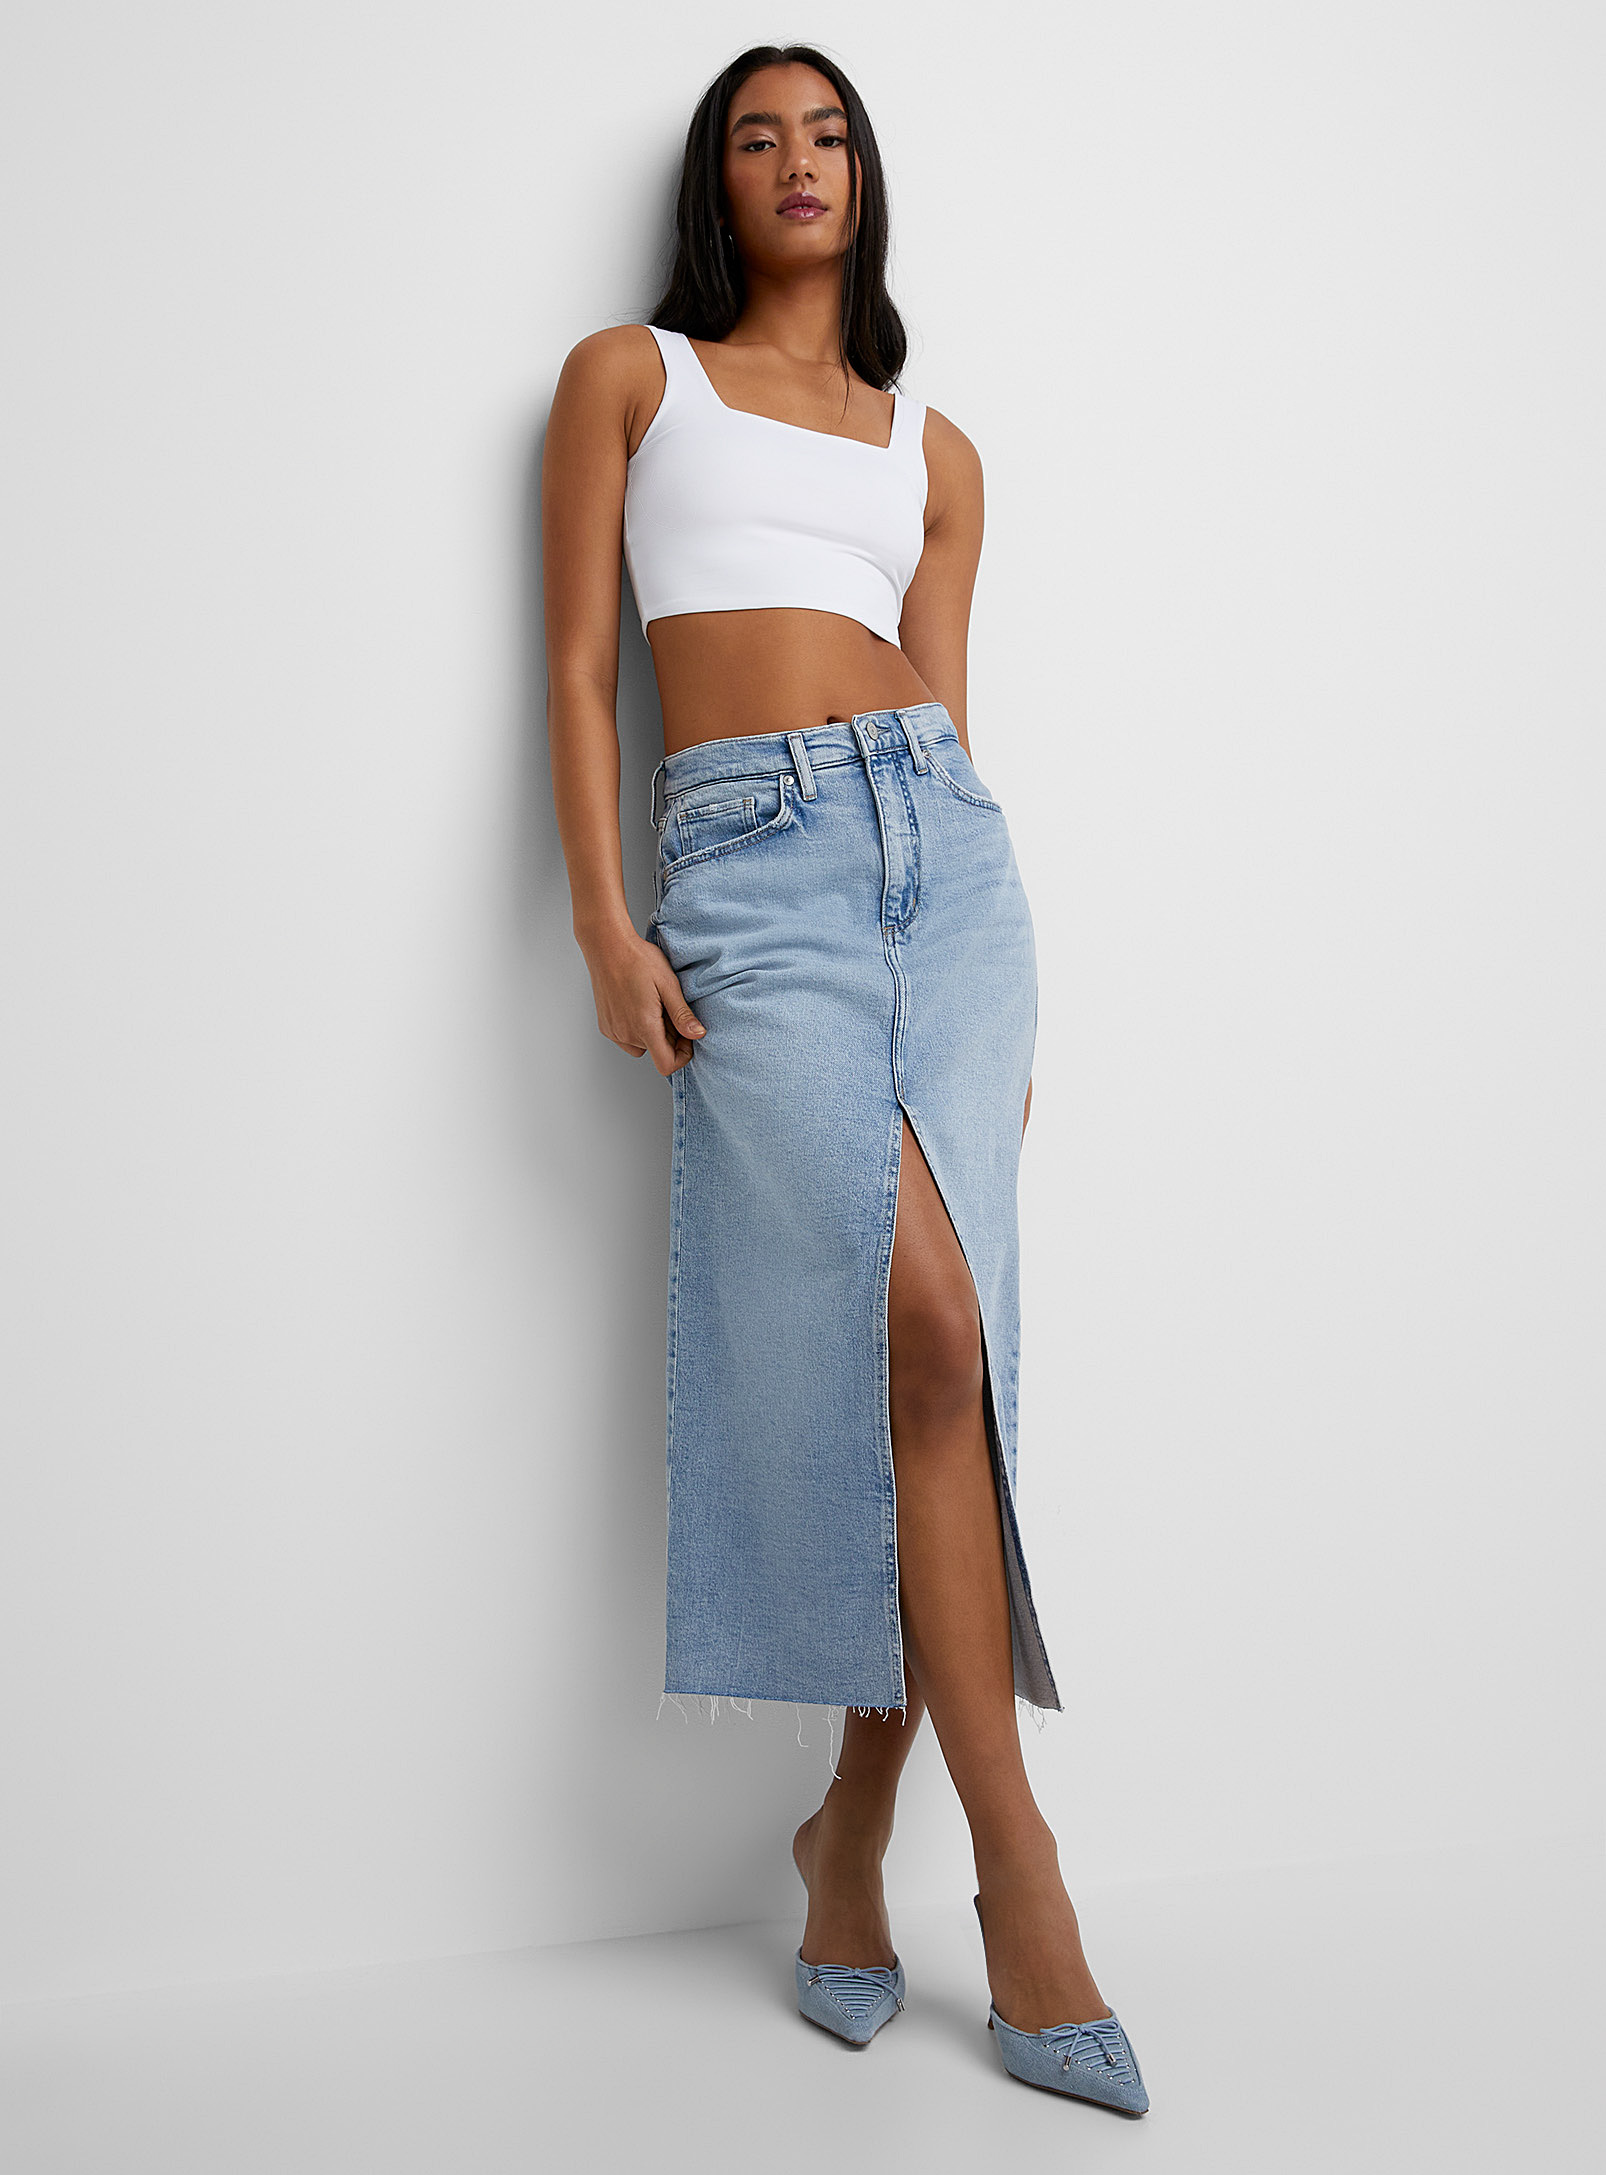 Icone Long Front Slit Faded Denim Skirt In Blue